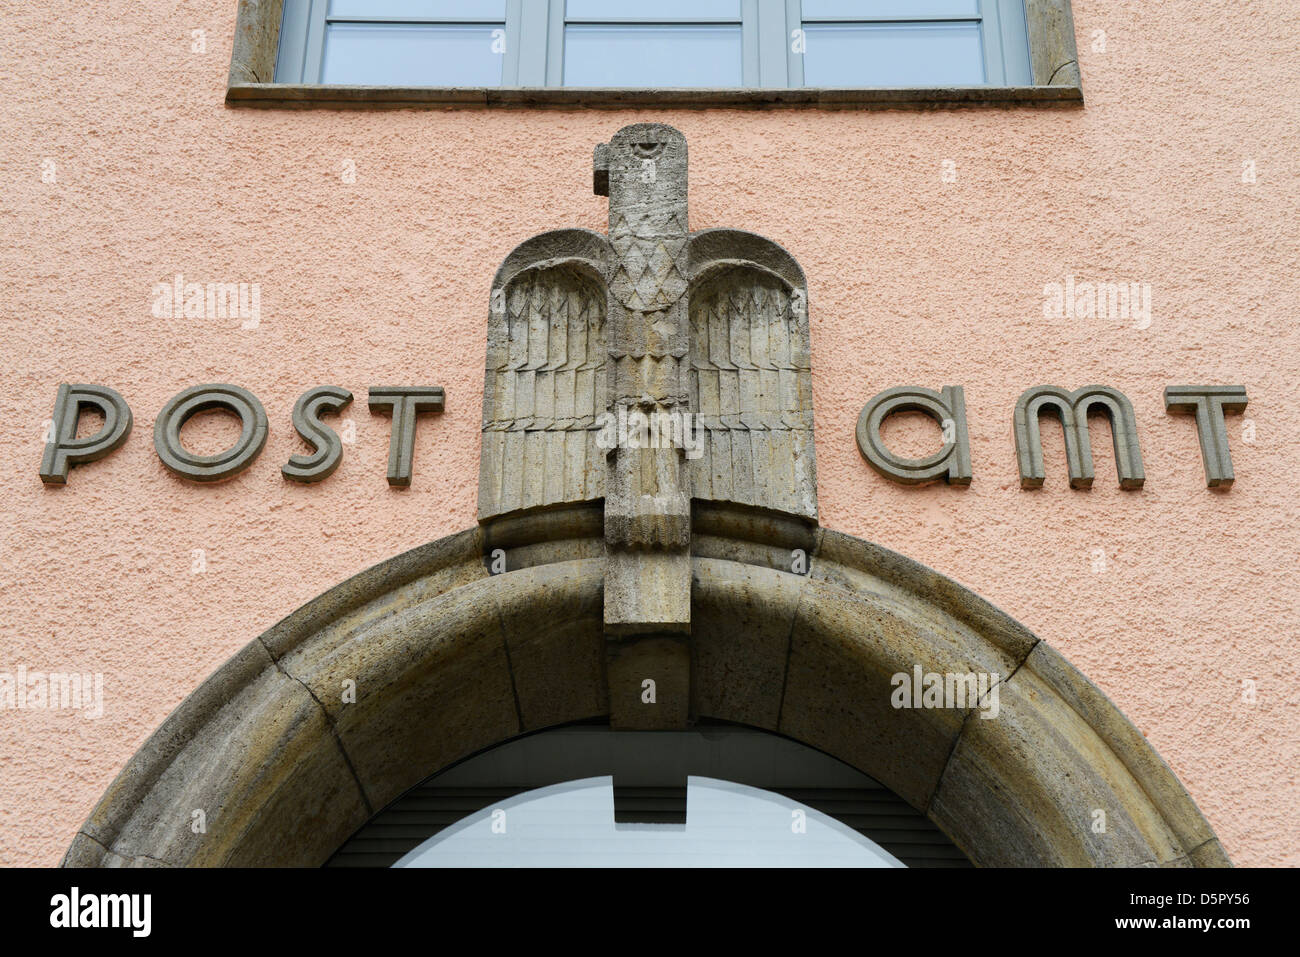 Stone eagle sculpture above archway on German post office Stock Photo